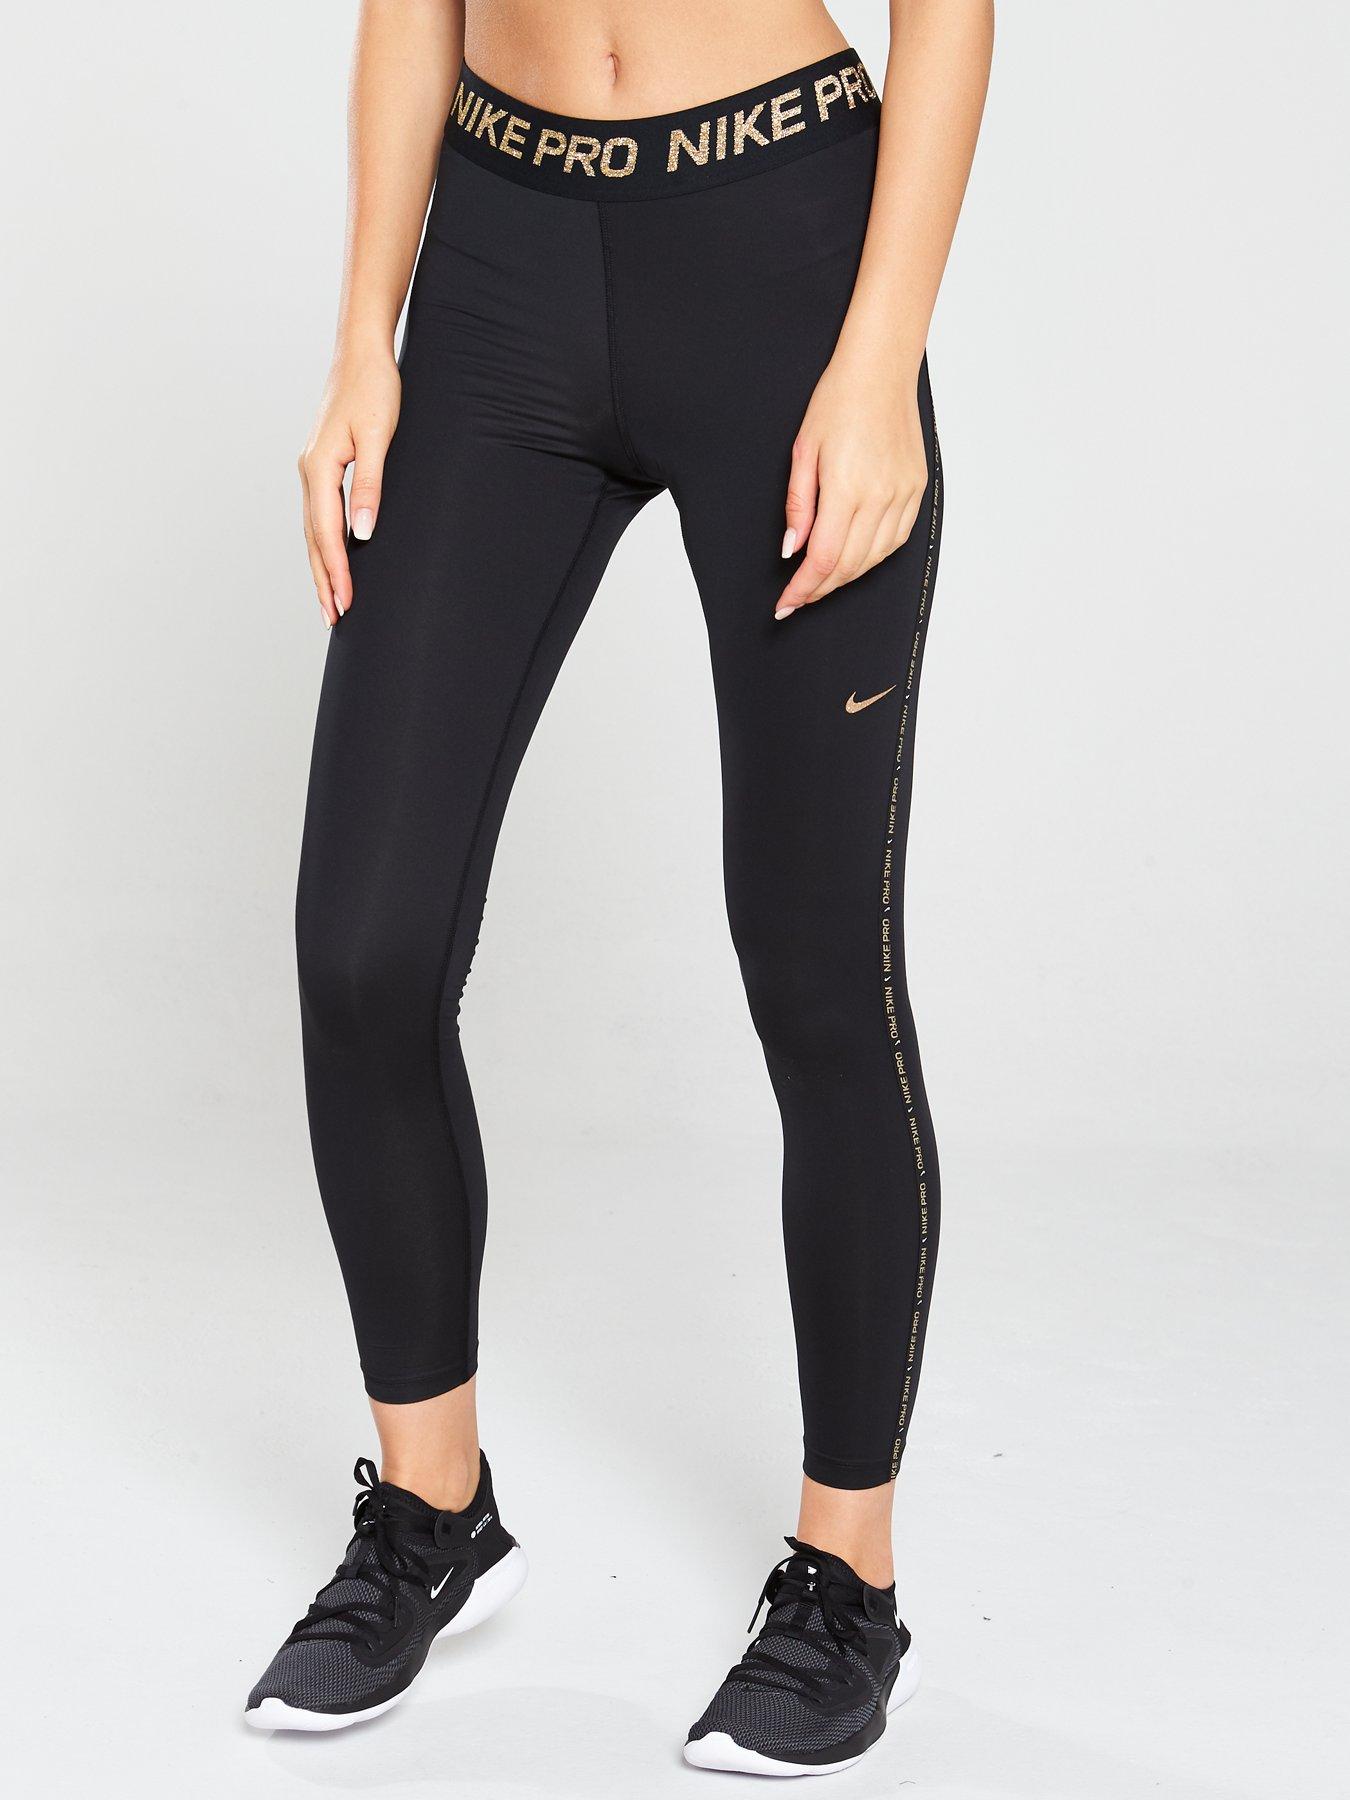 gold and black nike tights